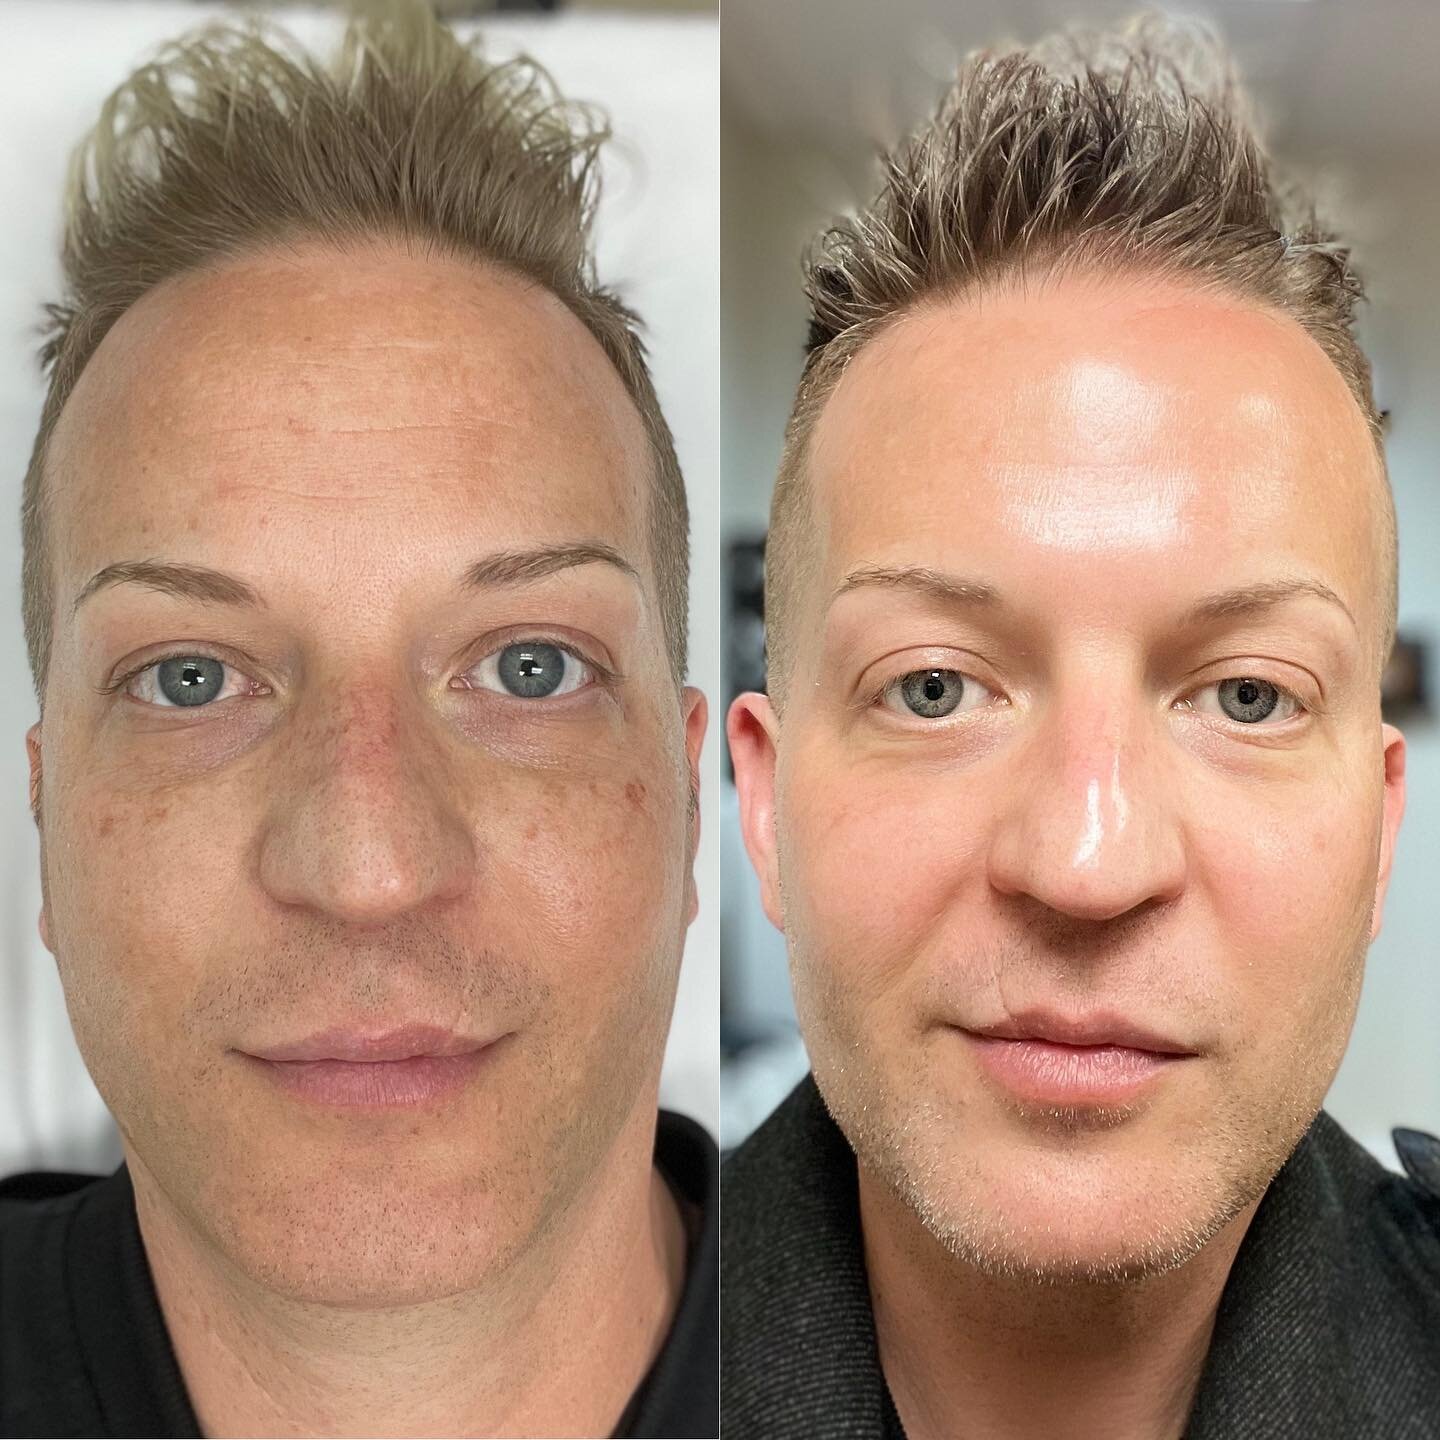 Wow, 2 years into my Aesthetician life and loving my own personal progress! 

Procedures/Treatments in the last 2 years include:

3 Fibroblast Treatments
3 Microneedle with PRP
TCA Chemical Peel
3 PRX Glow Peels
3 MIRApeel Treatments.

Plus the amazi